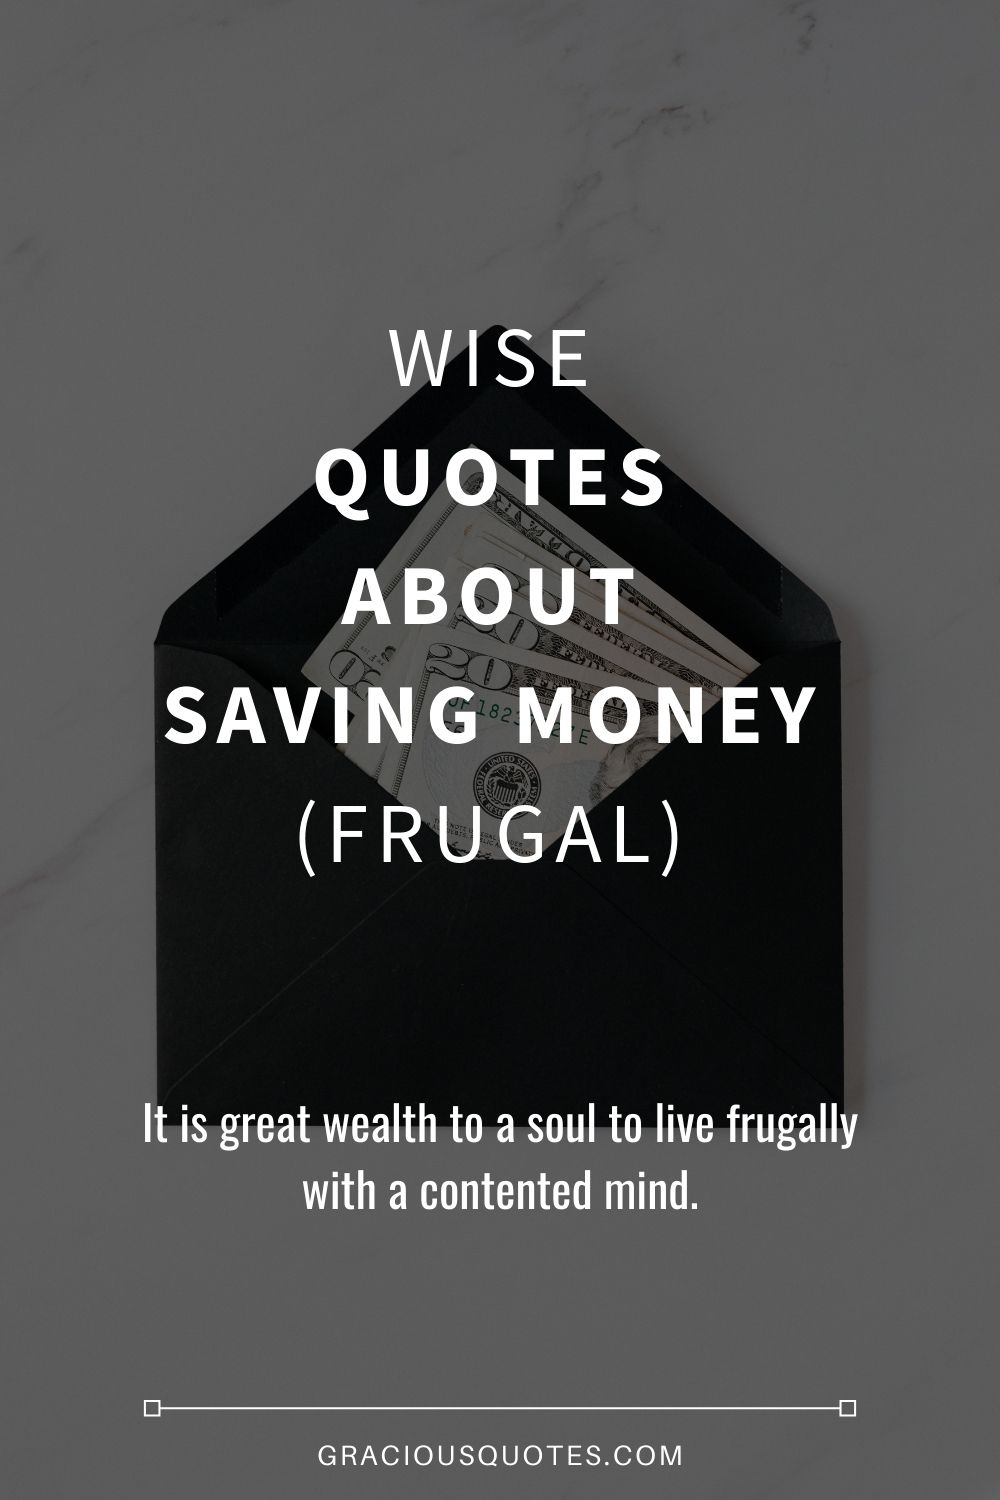 Wise Quotes About Saving Money (FRUGAL) - Gracious Quotes